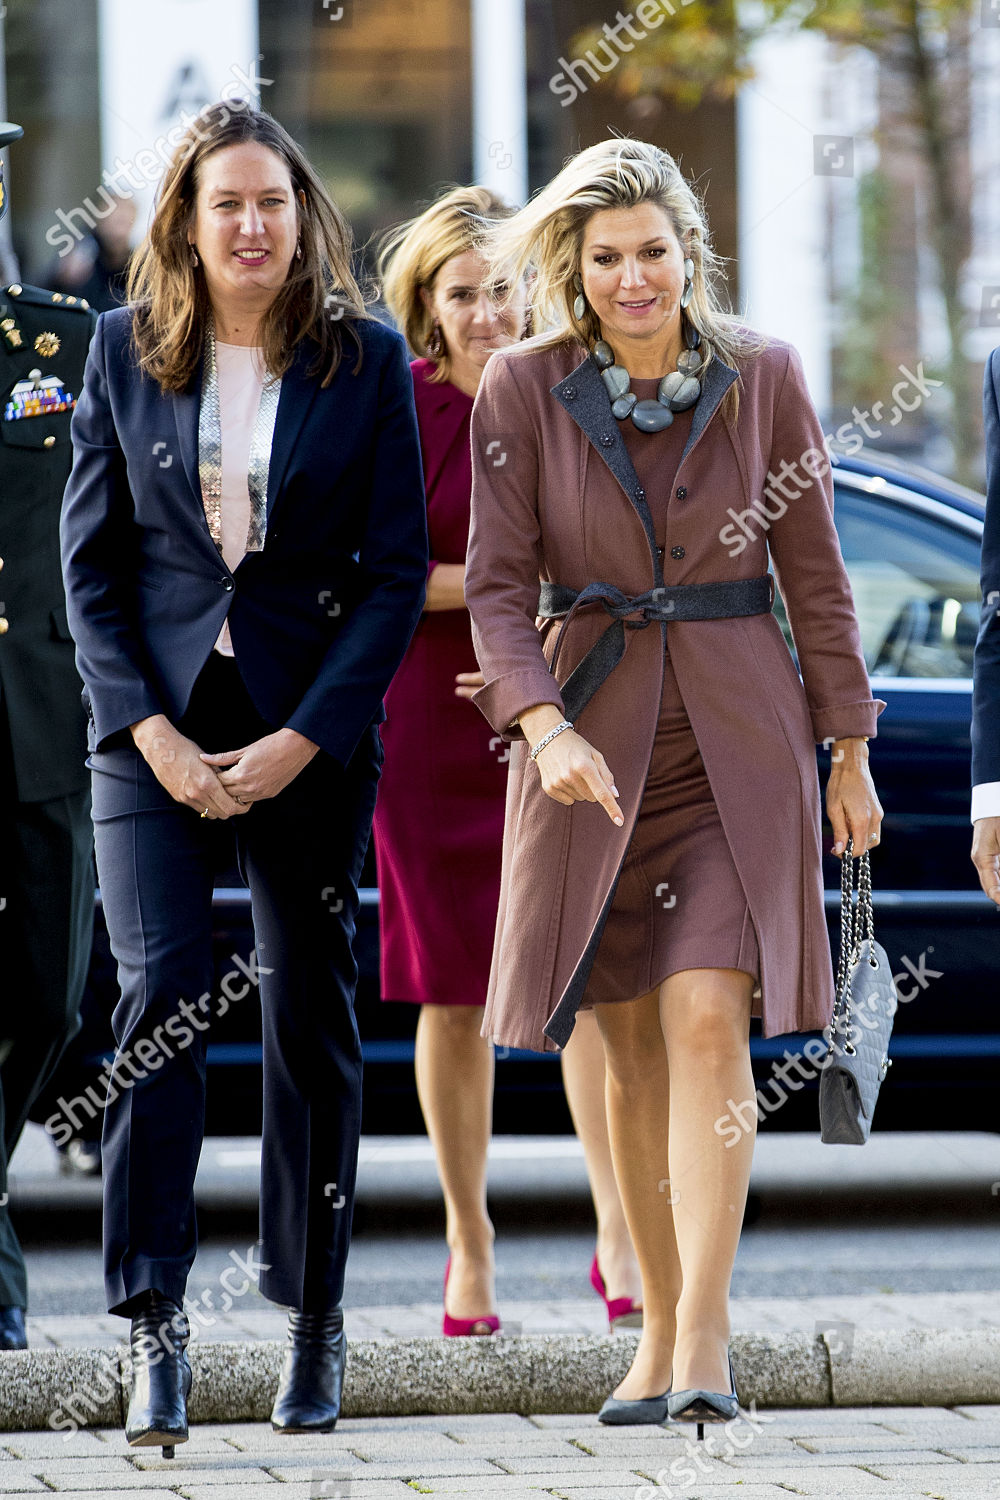 royal-visit-to-113-suicide-prevention-amsterdam-the-netherlands-shutterstock-editorial-9958951y.jpg